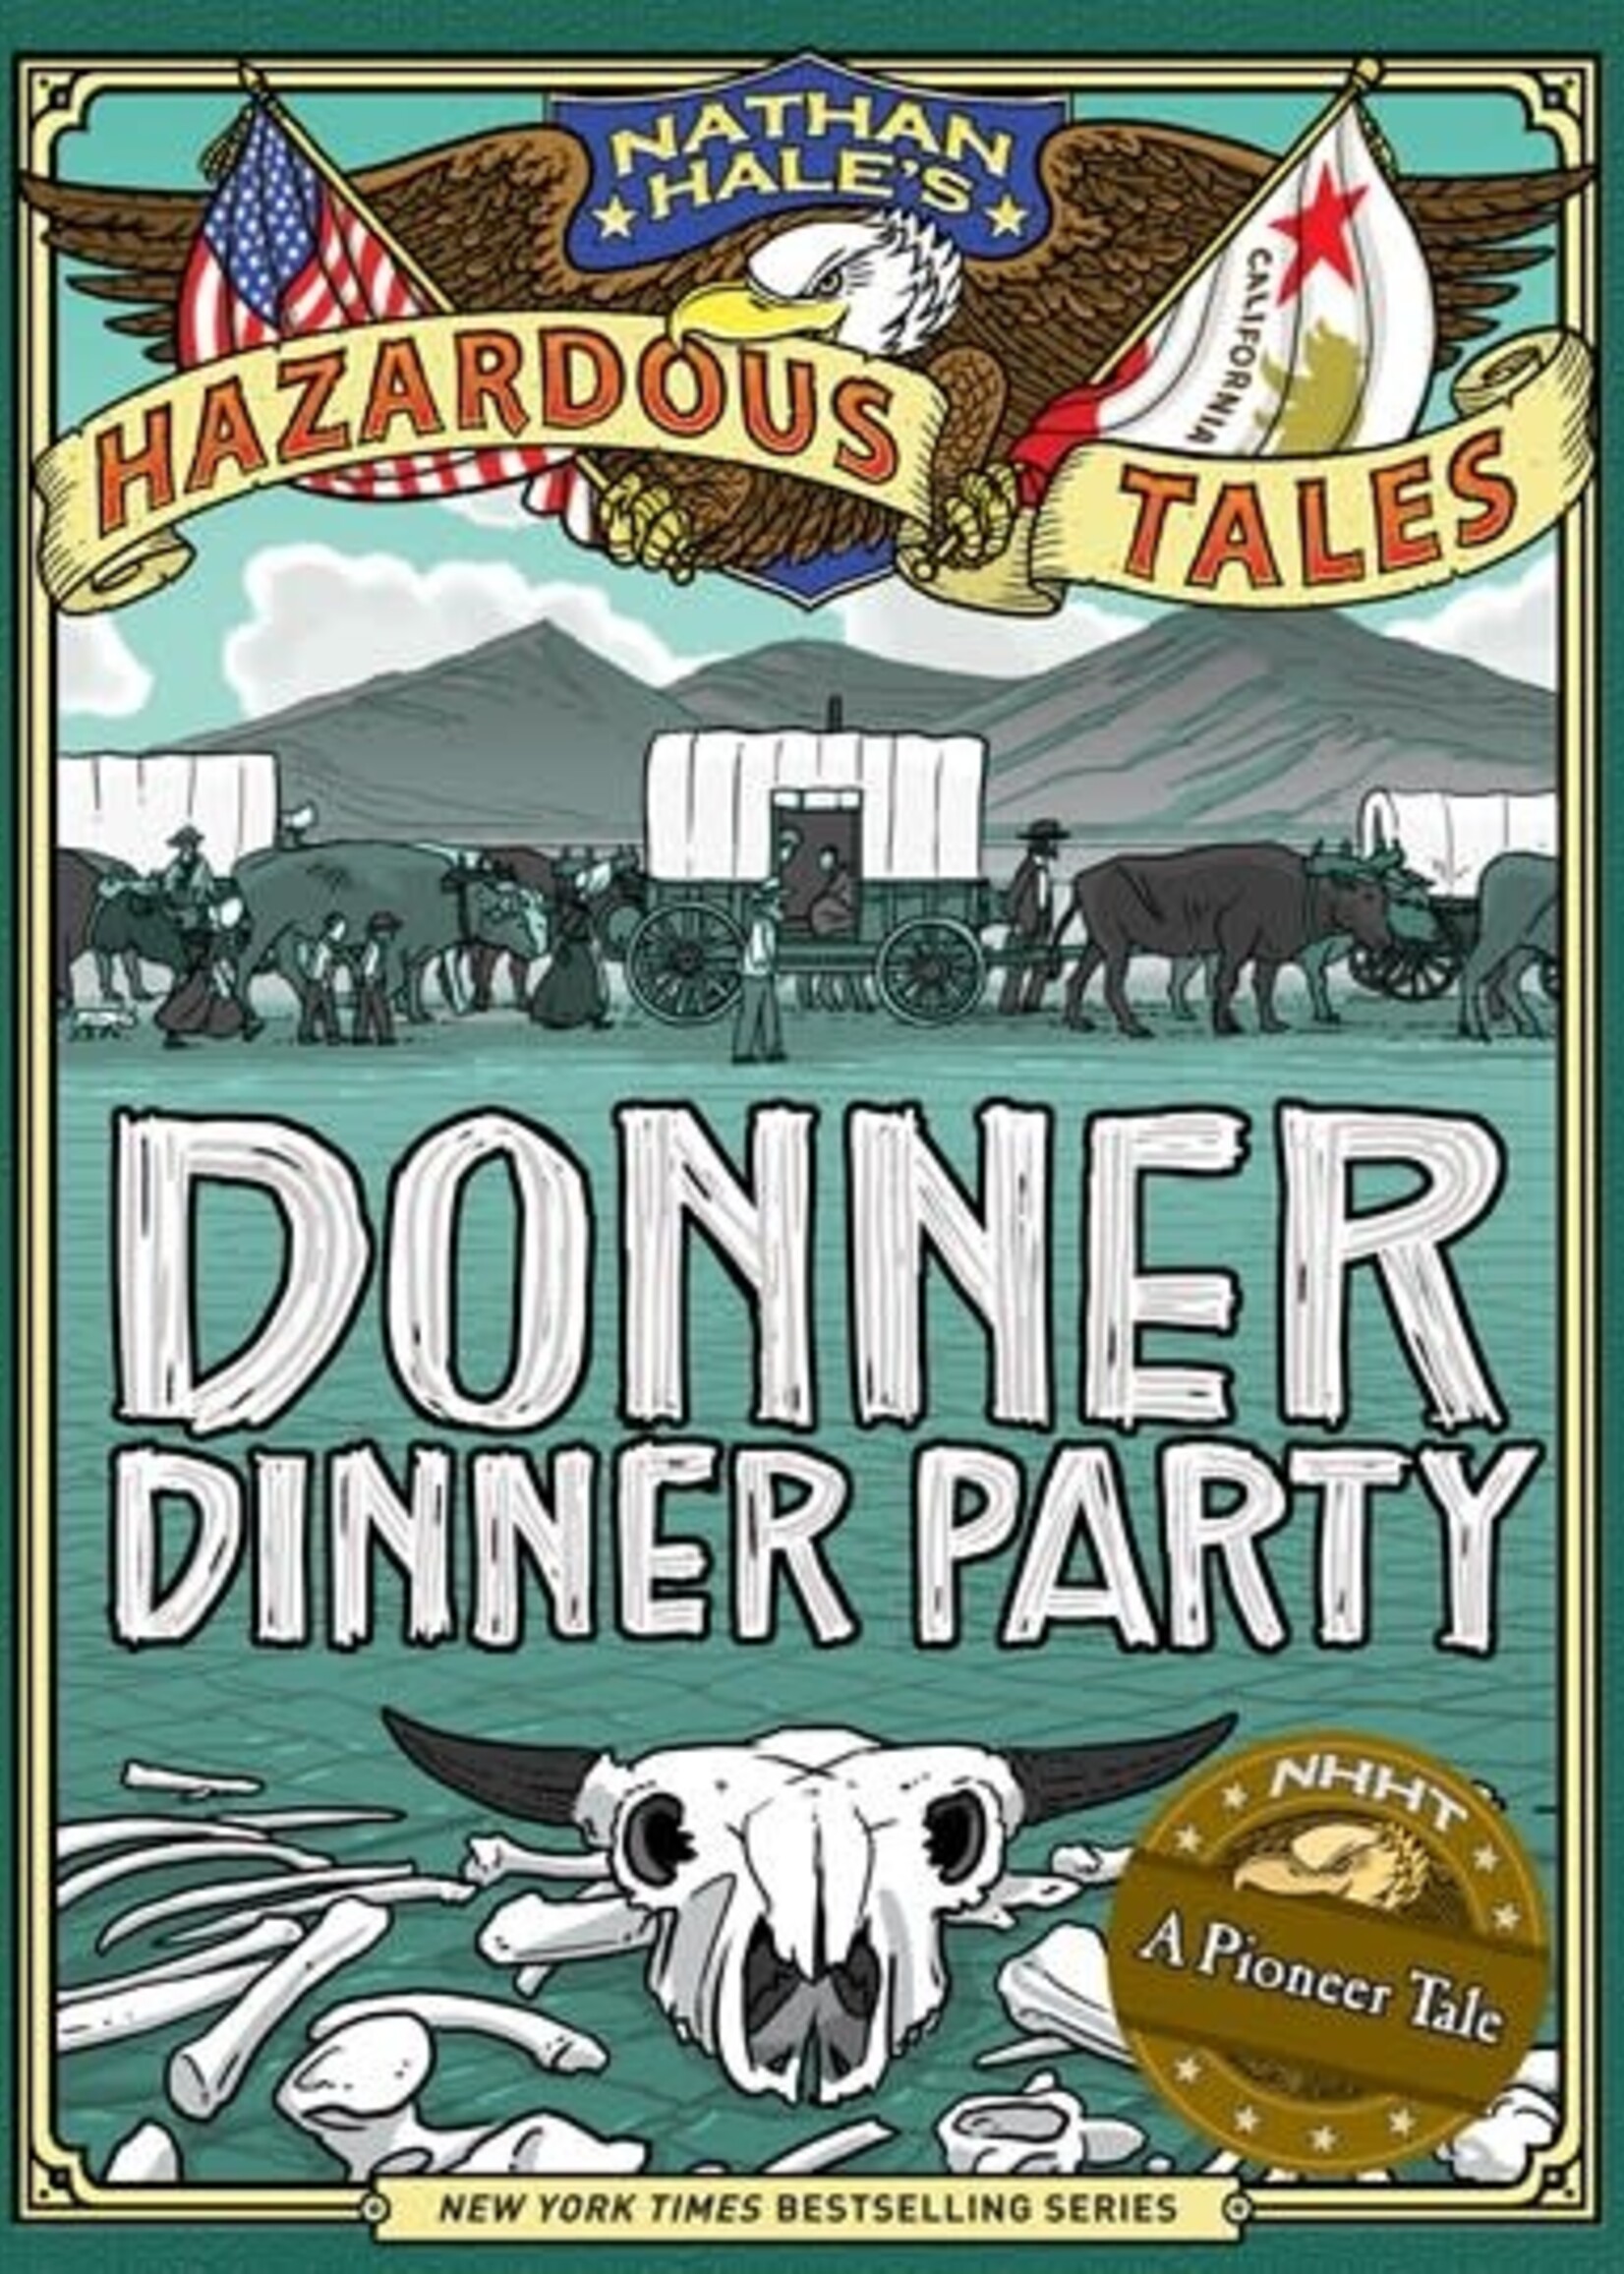 abrams Donner Dinner Party (Nathan Hale's Hazardous Tales #3): A Pioneer Tale